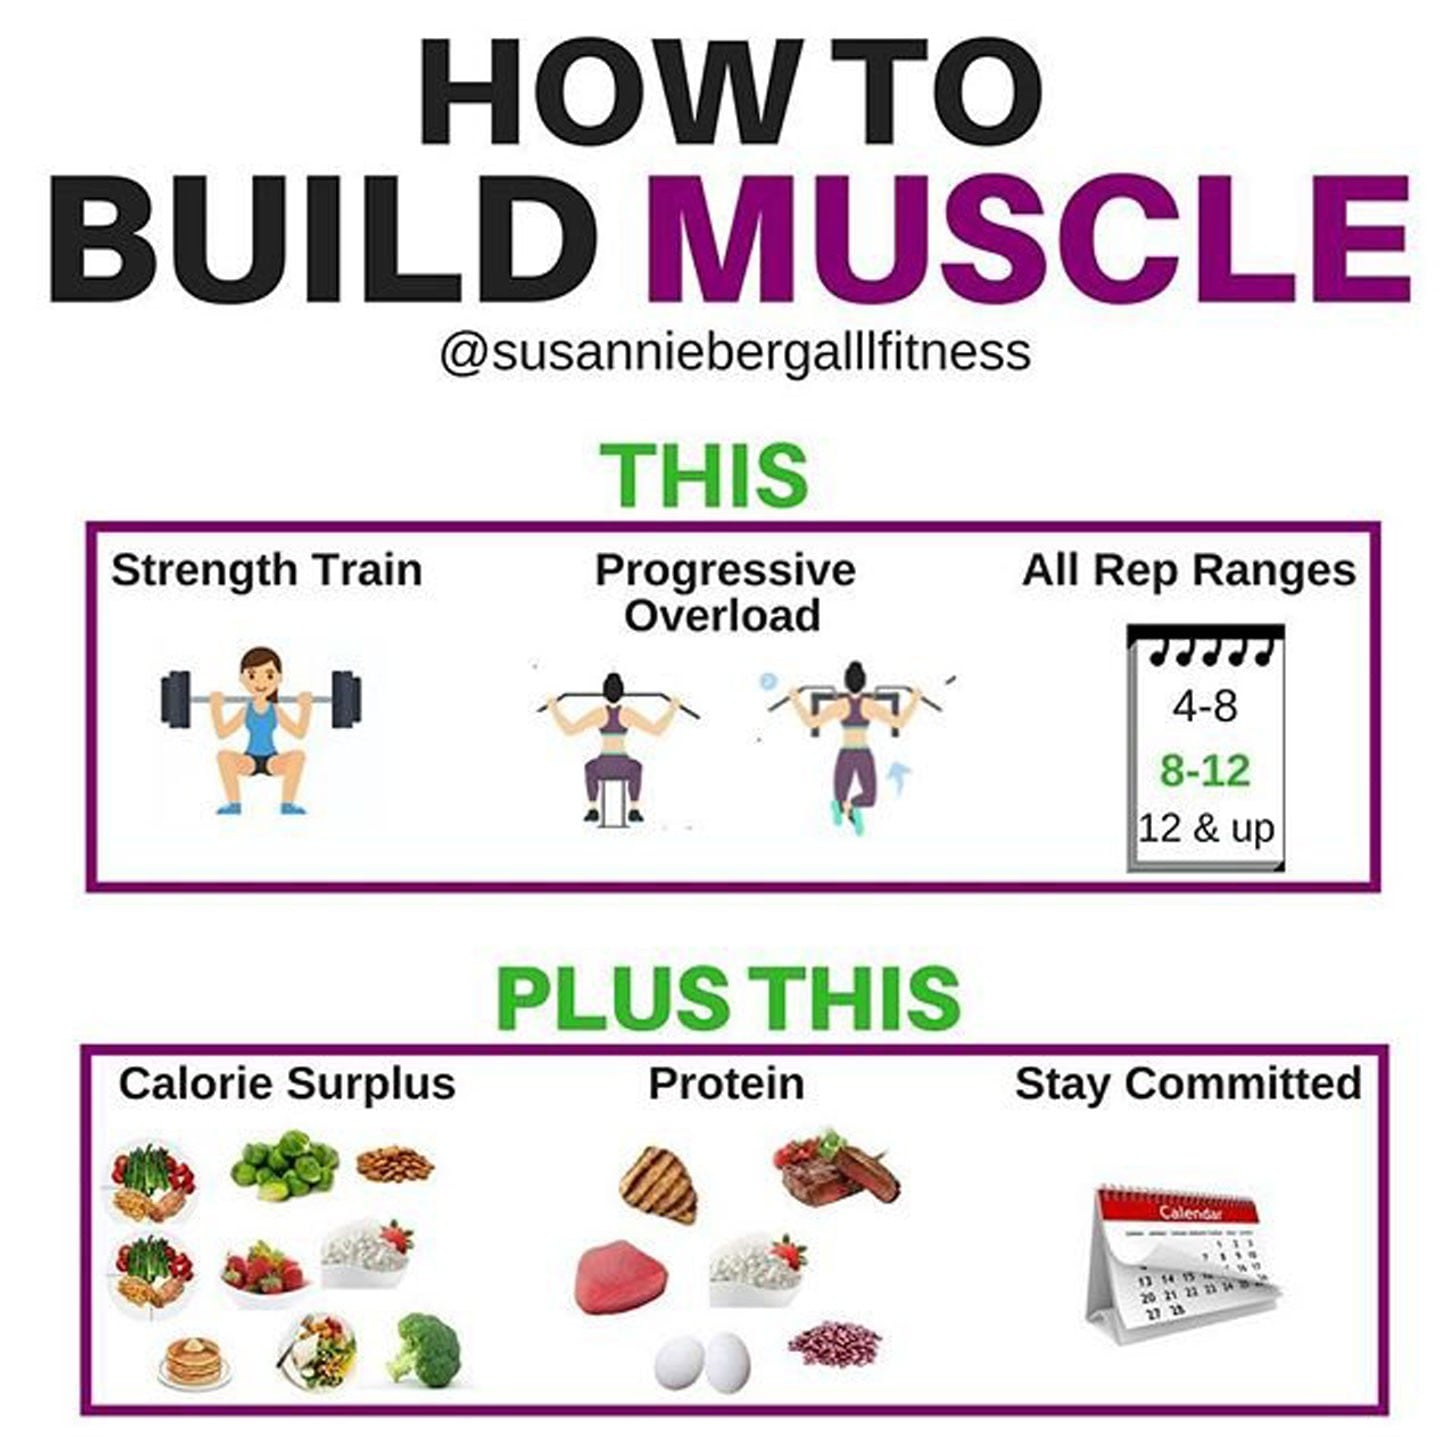 How to Build Muscle | POPSUGAR Fitness